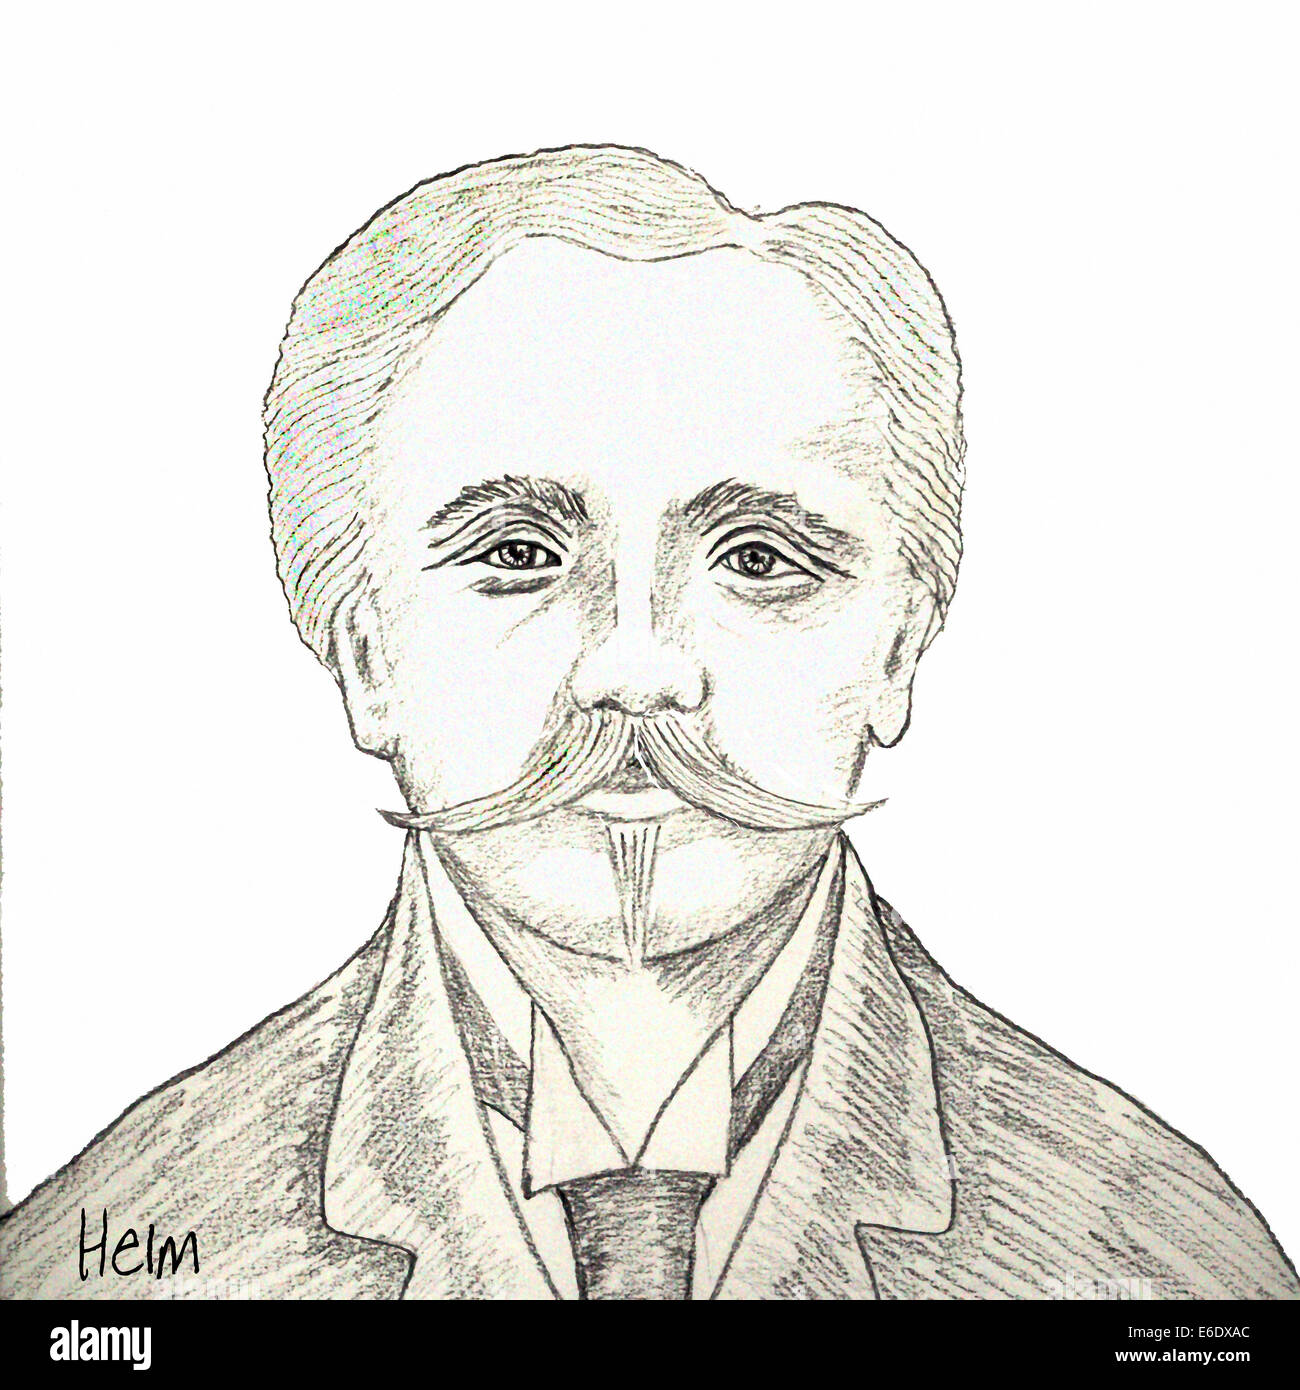 Gabriel Fauré (1845-1924) French composer, illustration, Stock Photo